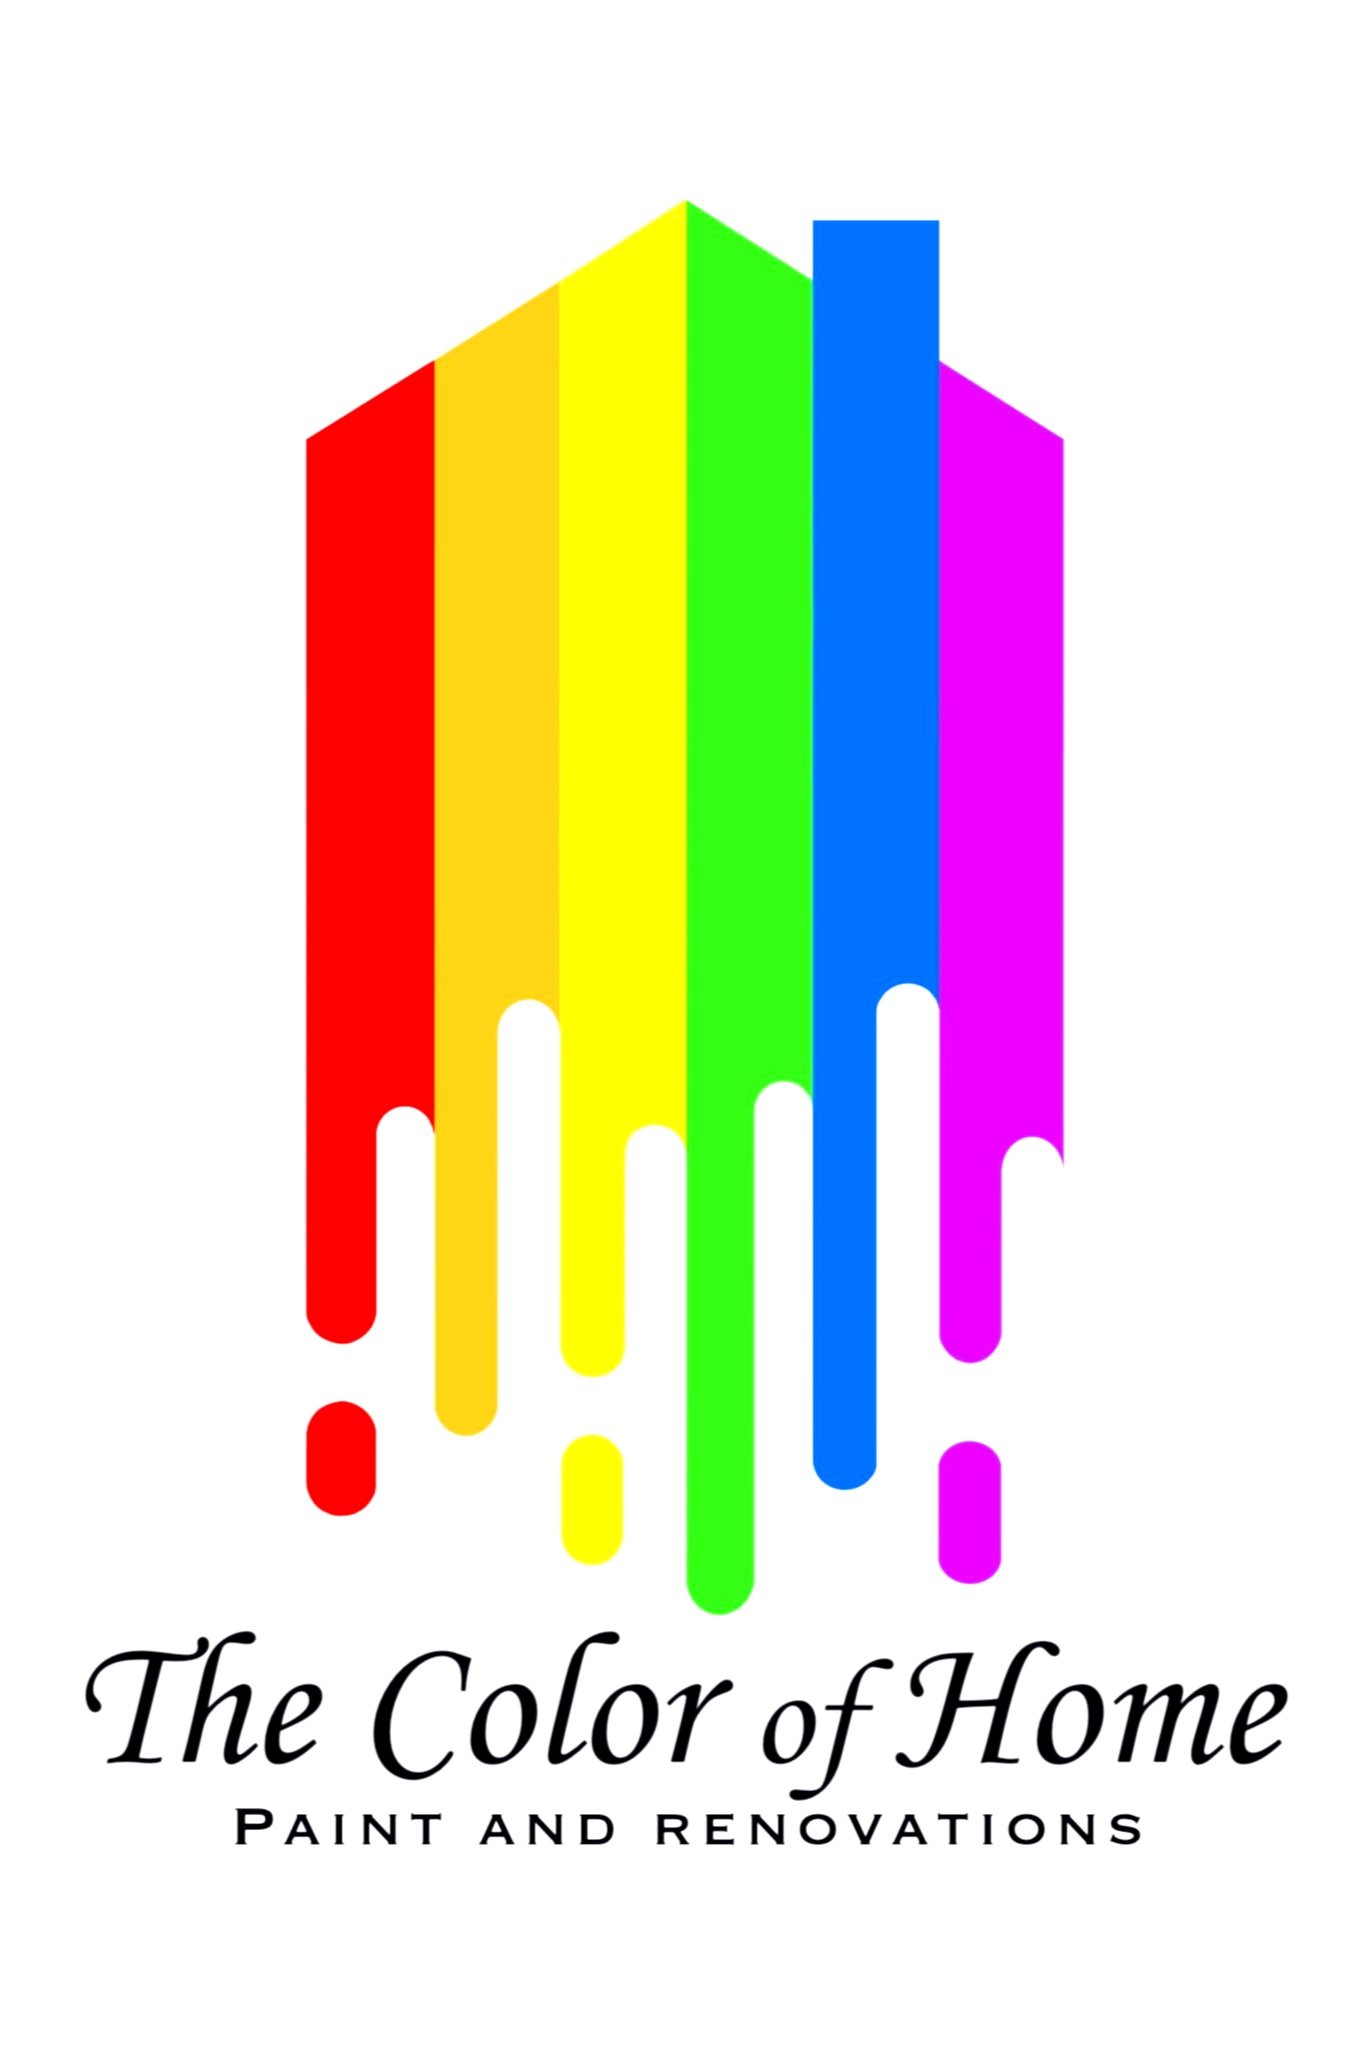 The Color of Home Paint and Renovations